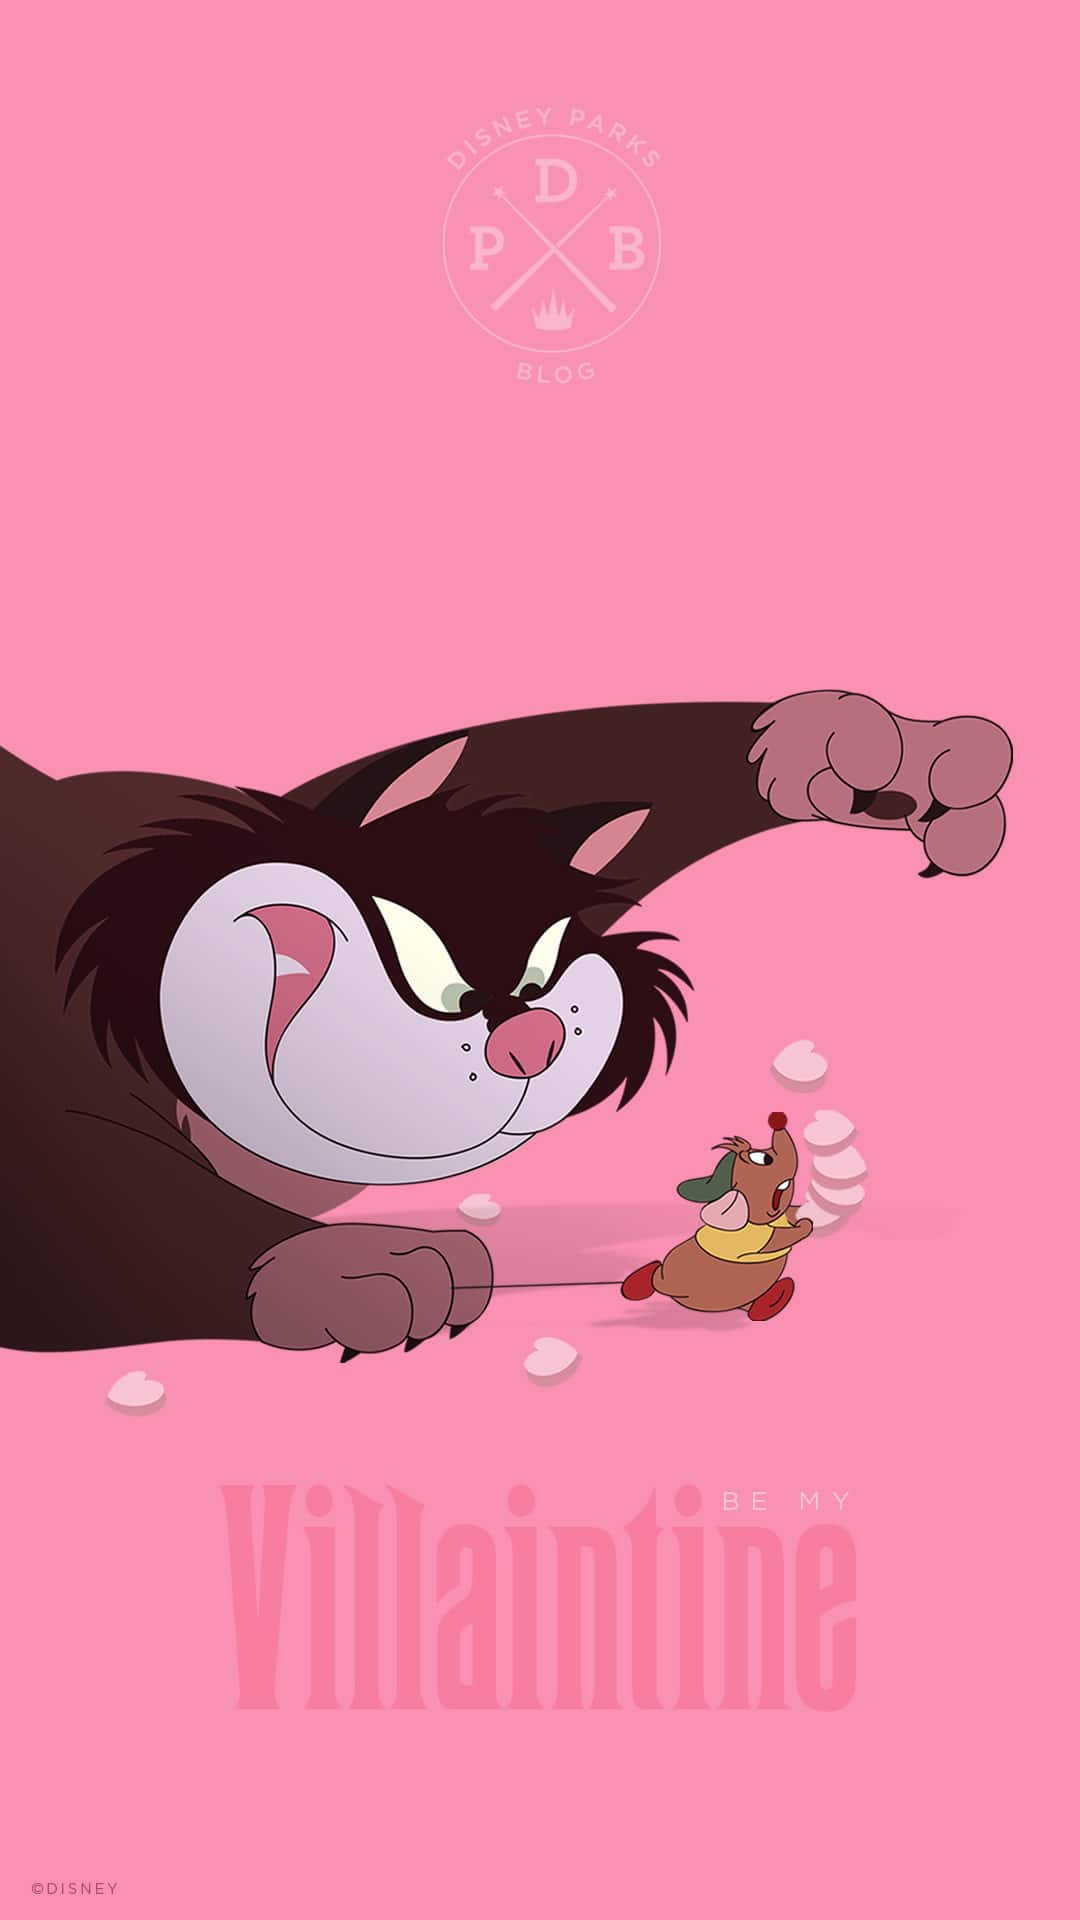 Disney Villains wallpaper for your phone! Download it here: - Tom and Jerry